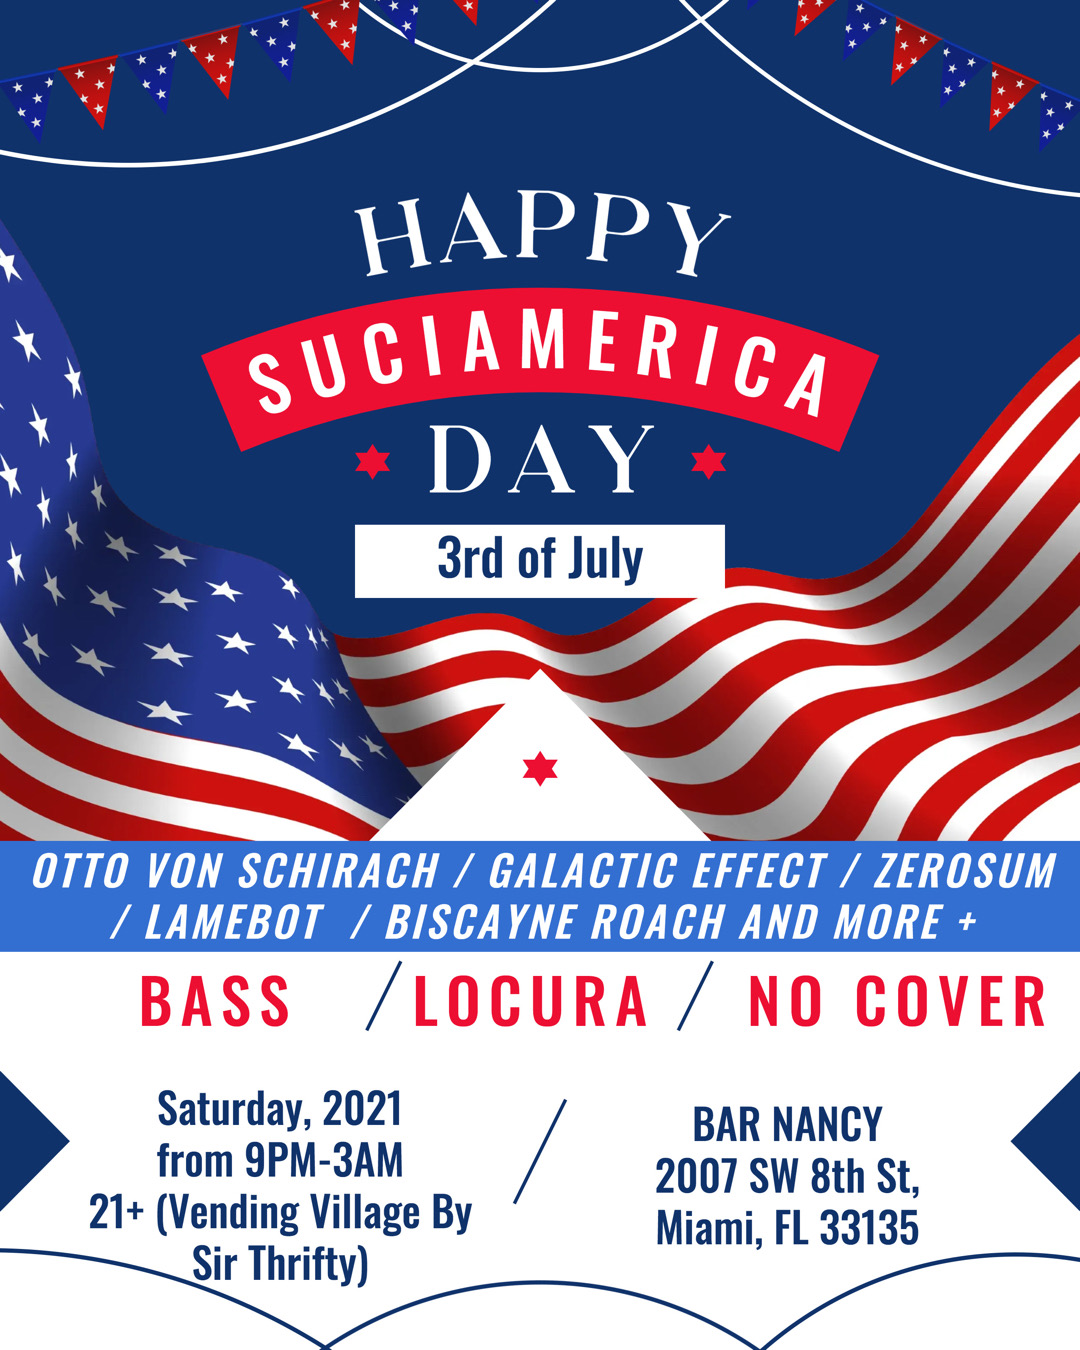 Happy Suciamerica Day - 3rd of July at Bar Nancy